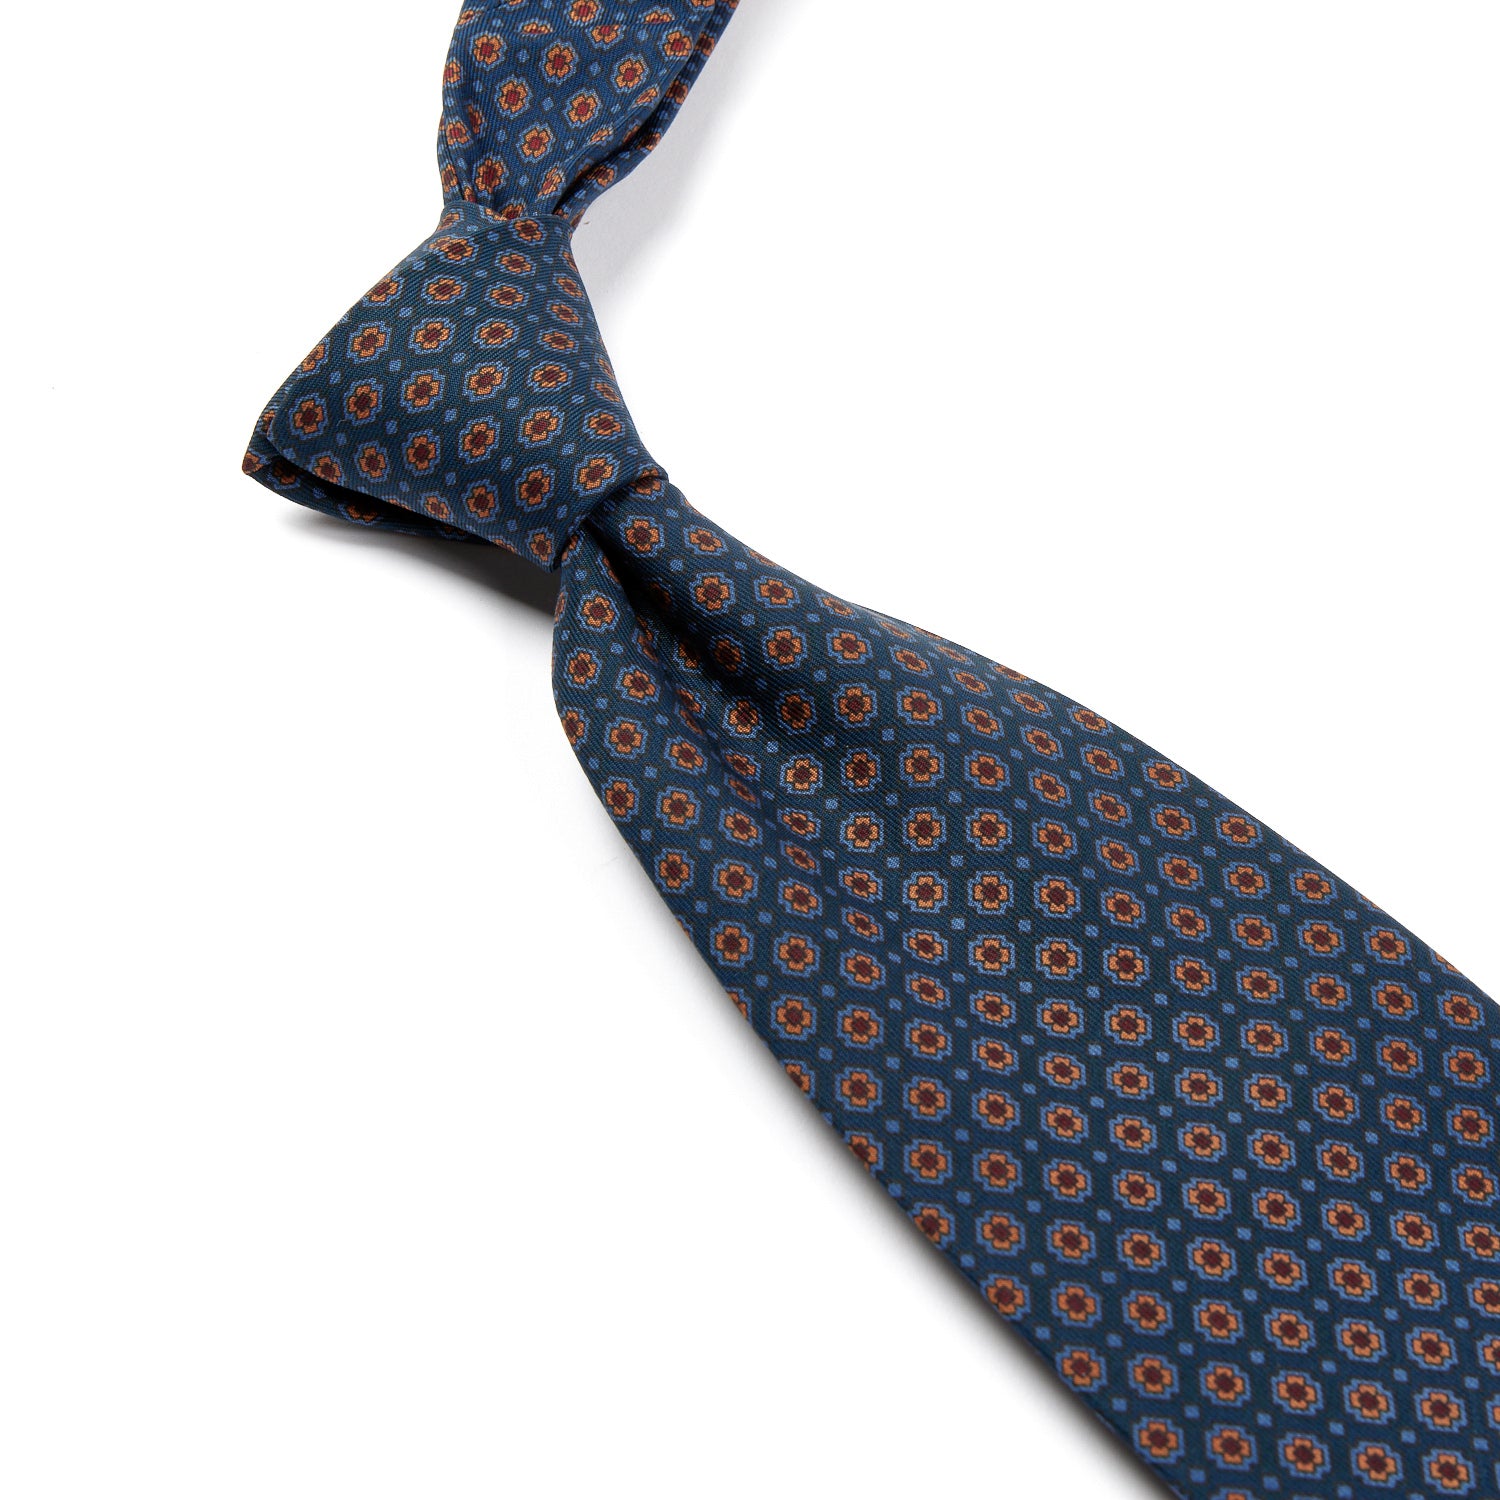 A Sovereign Grade Blue Small Floral Ancient Madder Tie, handmade in the United Kingdom and sold by KirbyAllison.com.